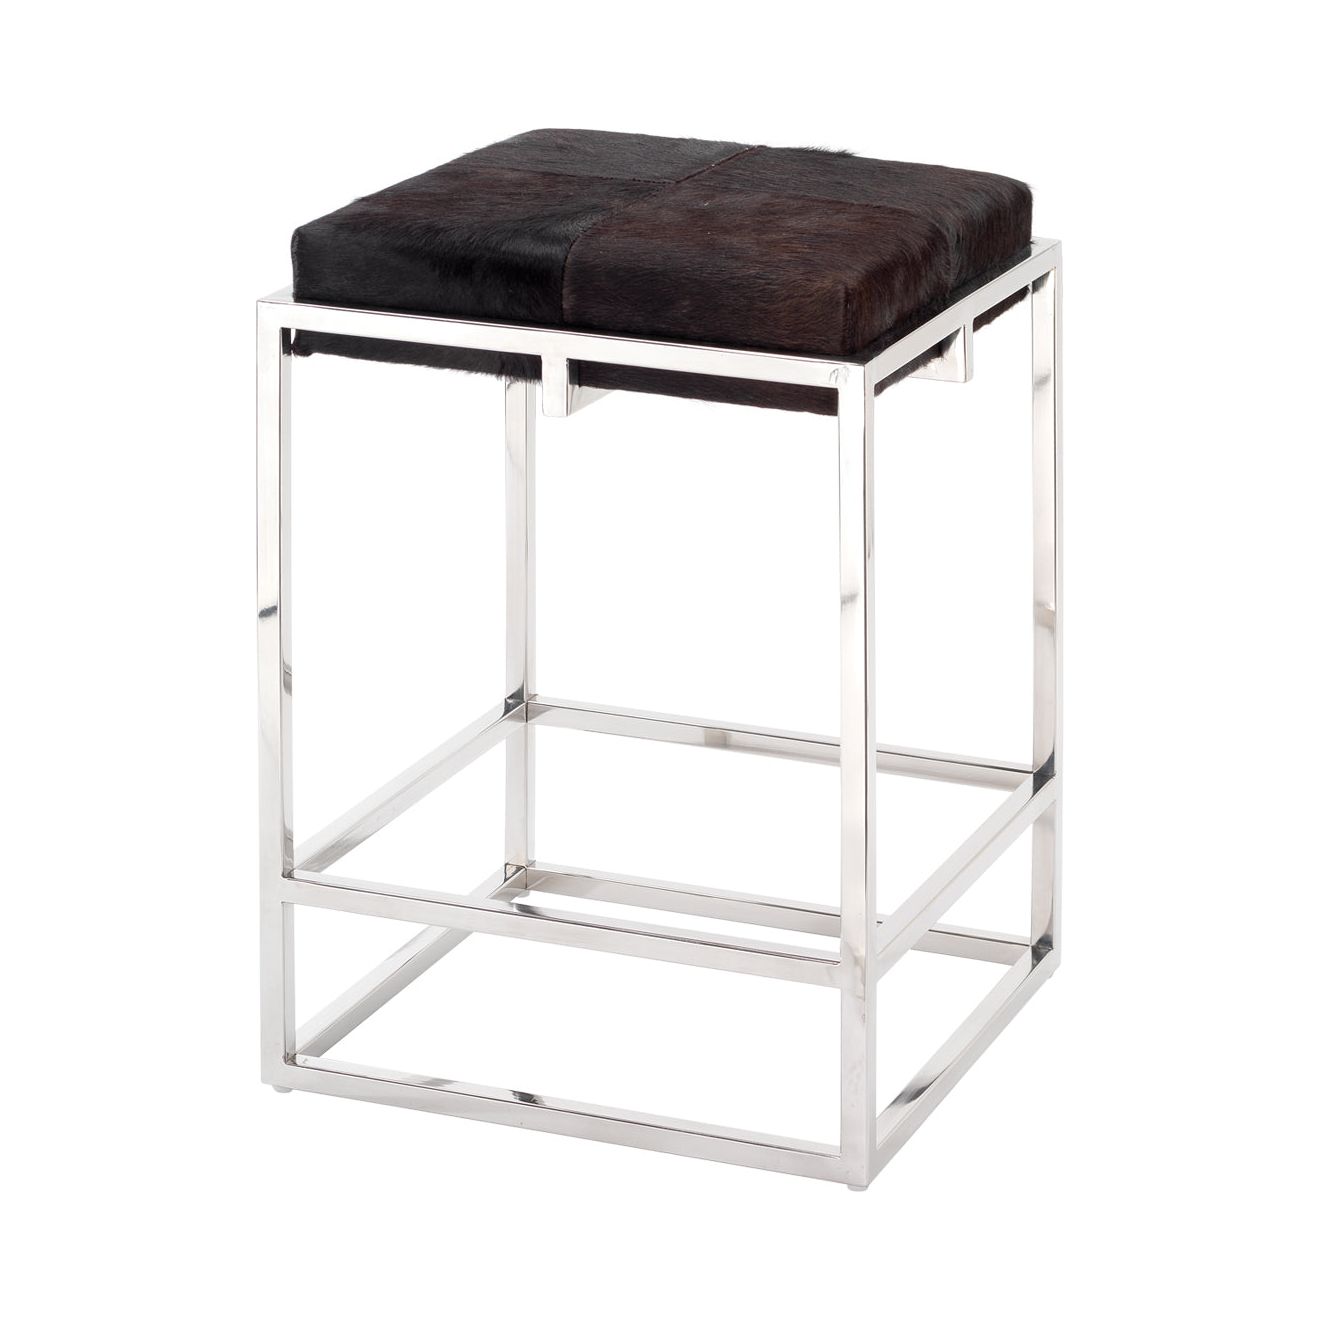 Jamie Young Company - 20SHEL-CSES - Shelby Counter Stool - Shelby - Brown